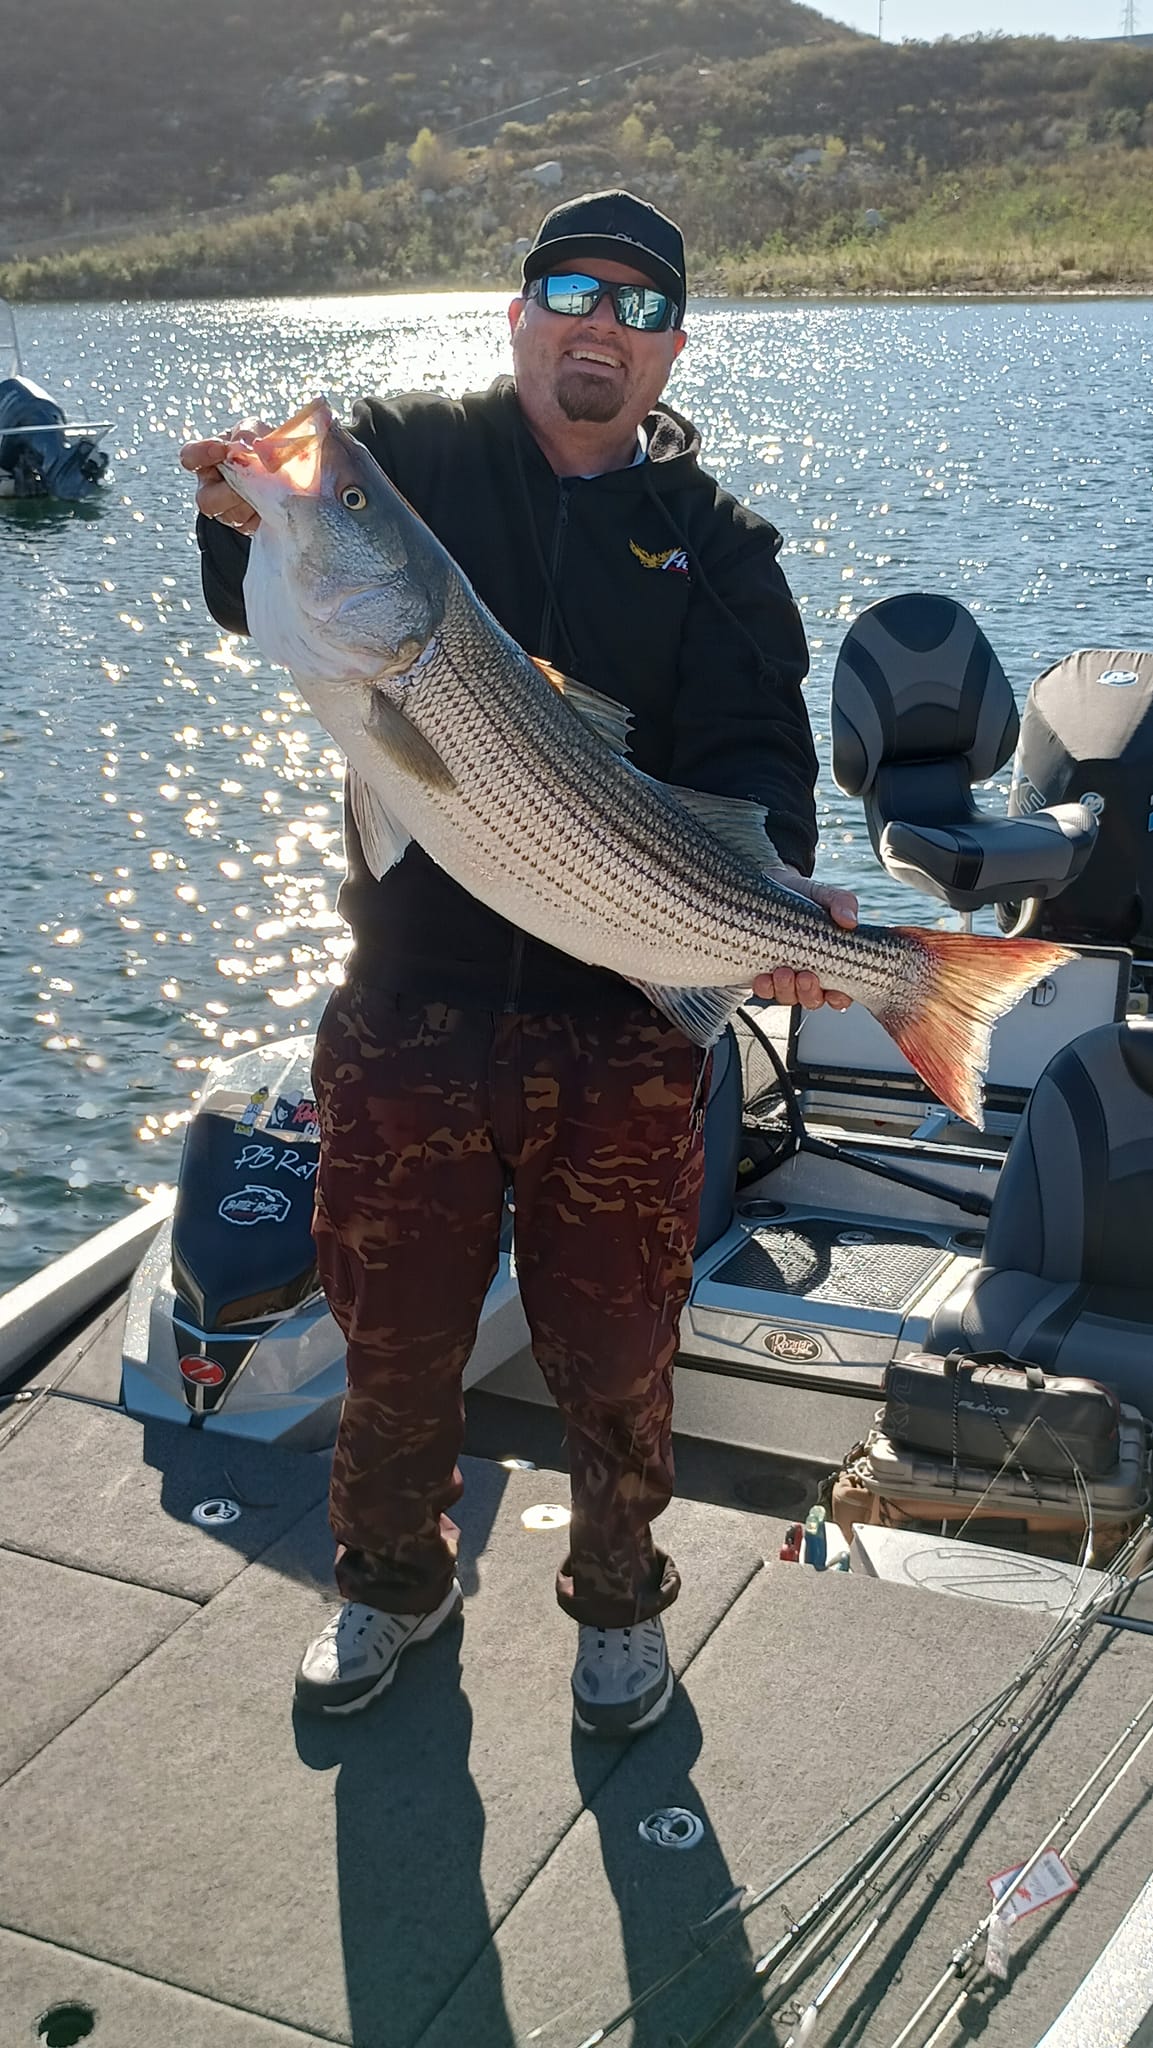 Freshwater – Bass angler shocked by big striper from San Diego lake